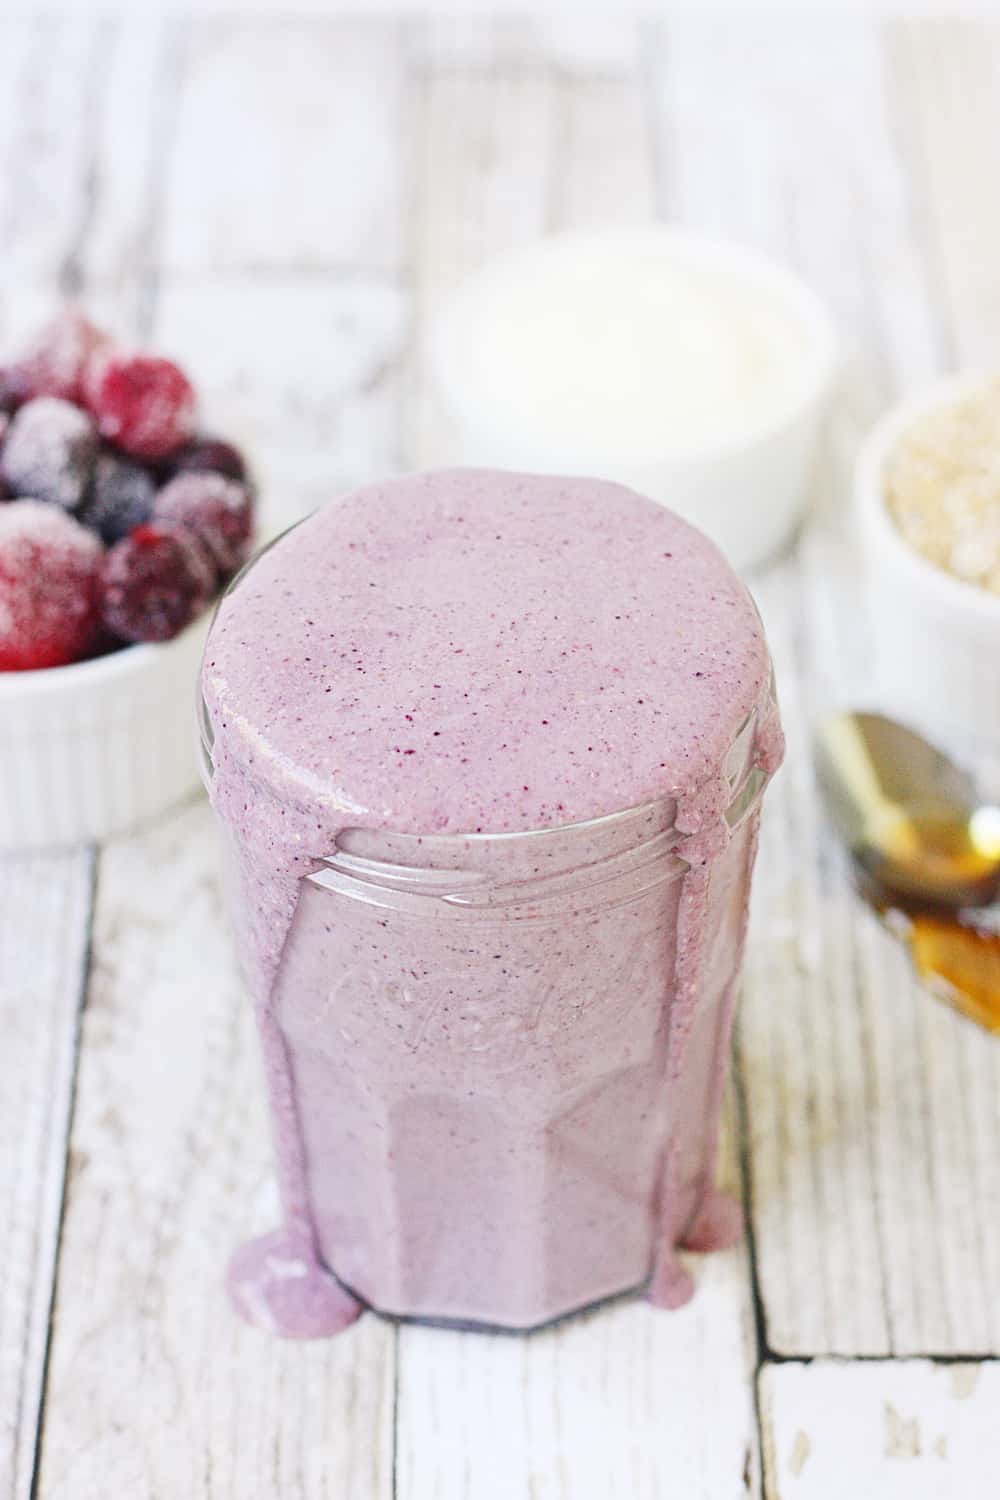 Mixed Berry Protein Smoothie - This mixed berry protein smoothie combines frozen berries, Greek yogurt, steel-cut oats, and protein powder for a healthy, delicious breakfast shake to start your day! #smoothie #proteinshake #proteinsmoothie #shake #breakfast #recipe #berry #halfscratched #ad #easyrecipe